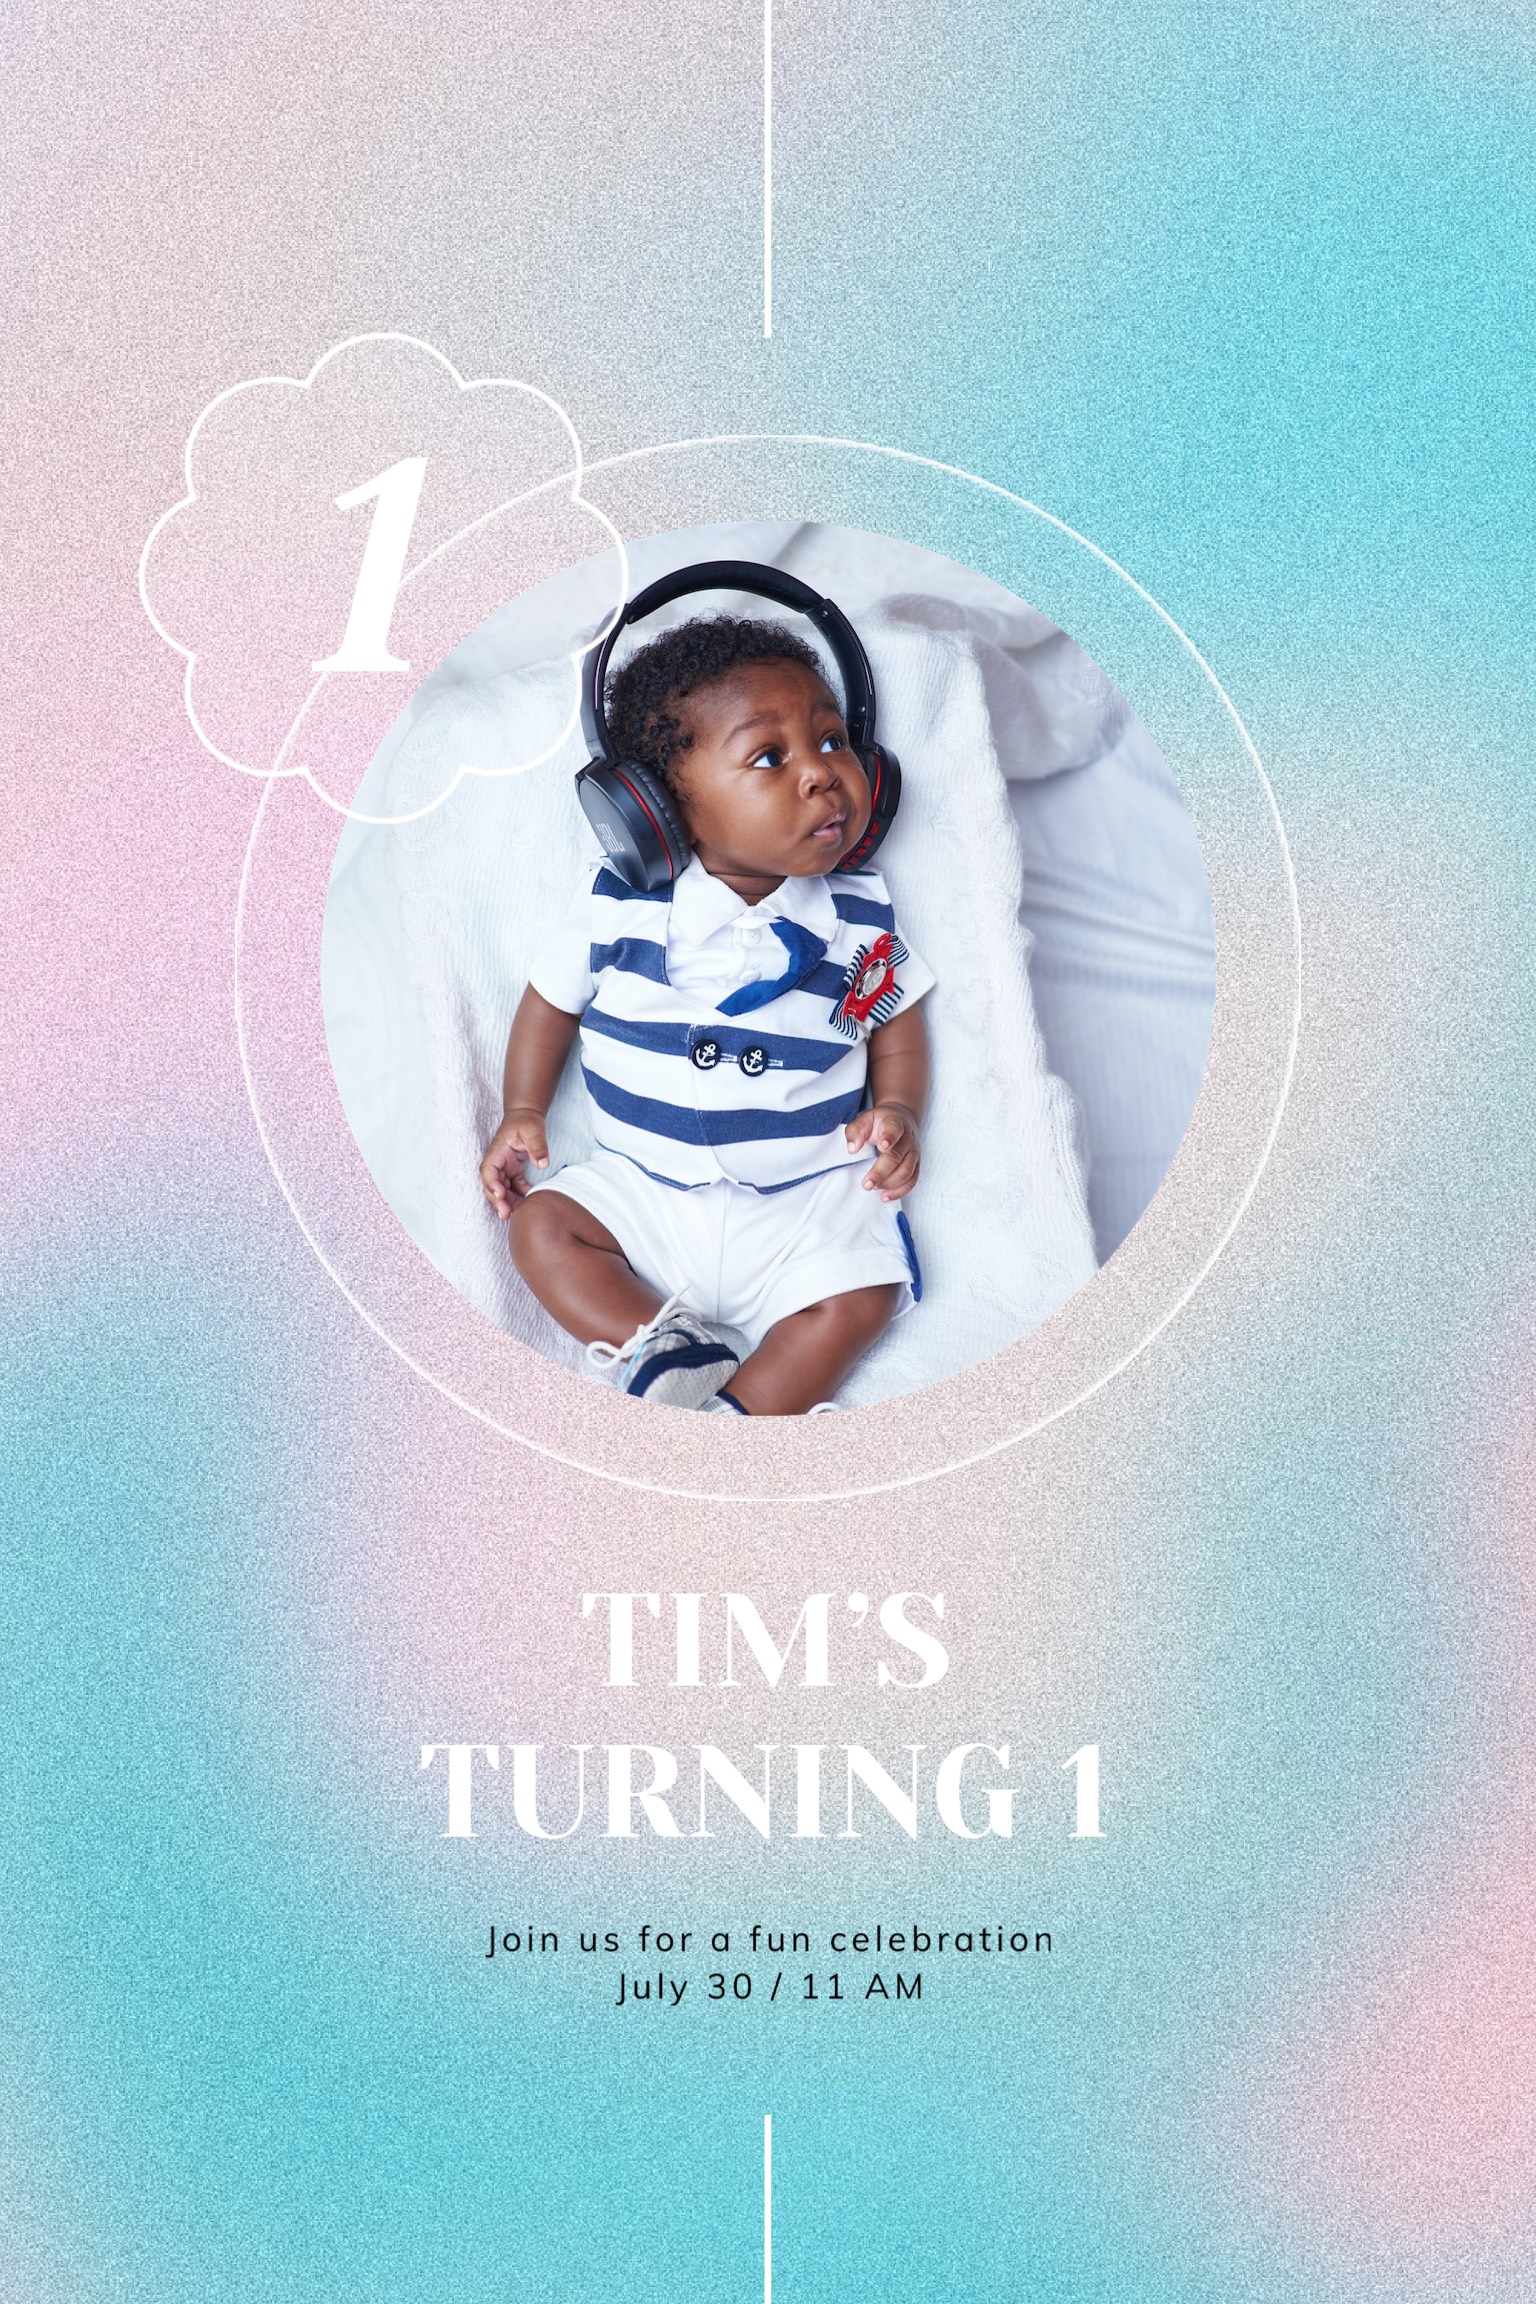 Baby turning one years old birthday invitation template